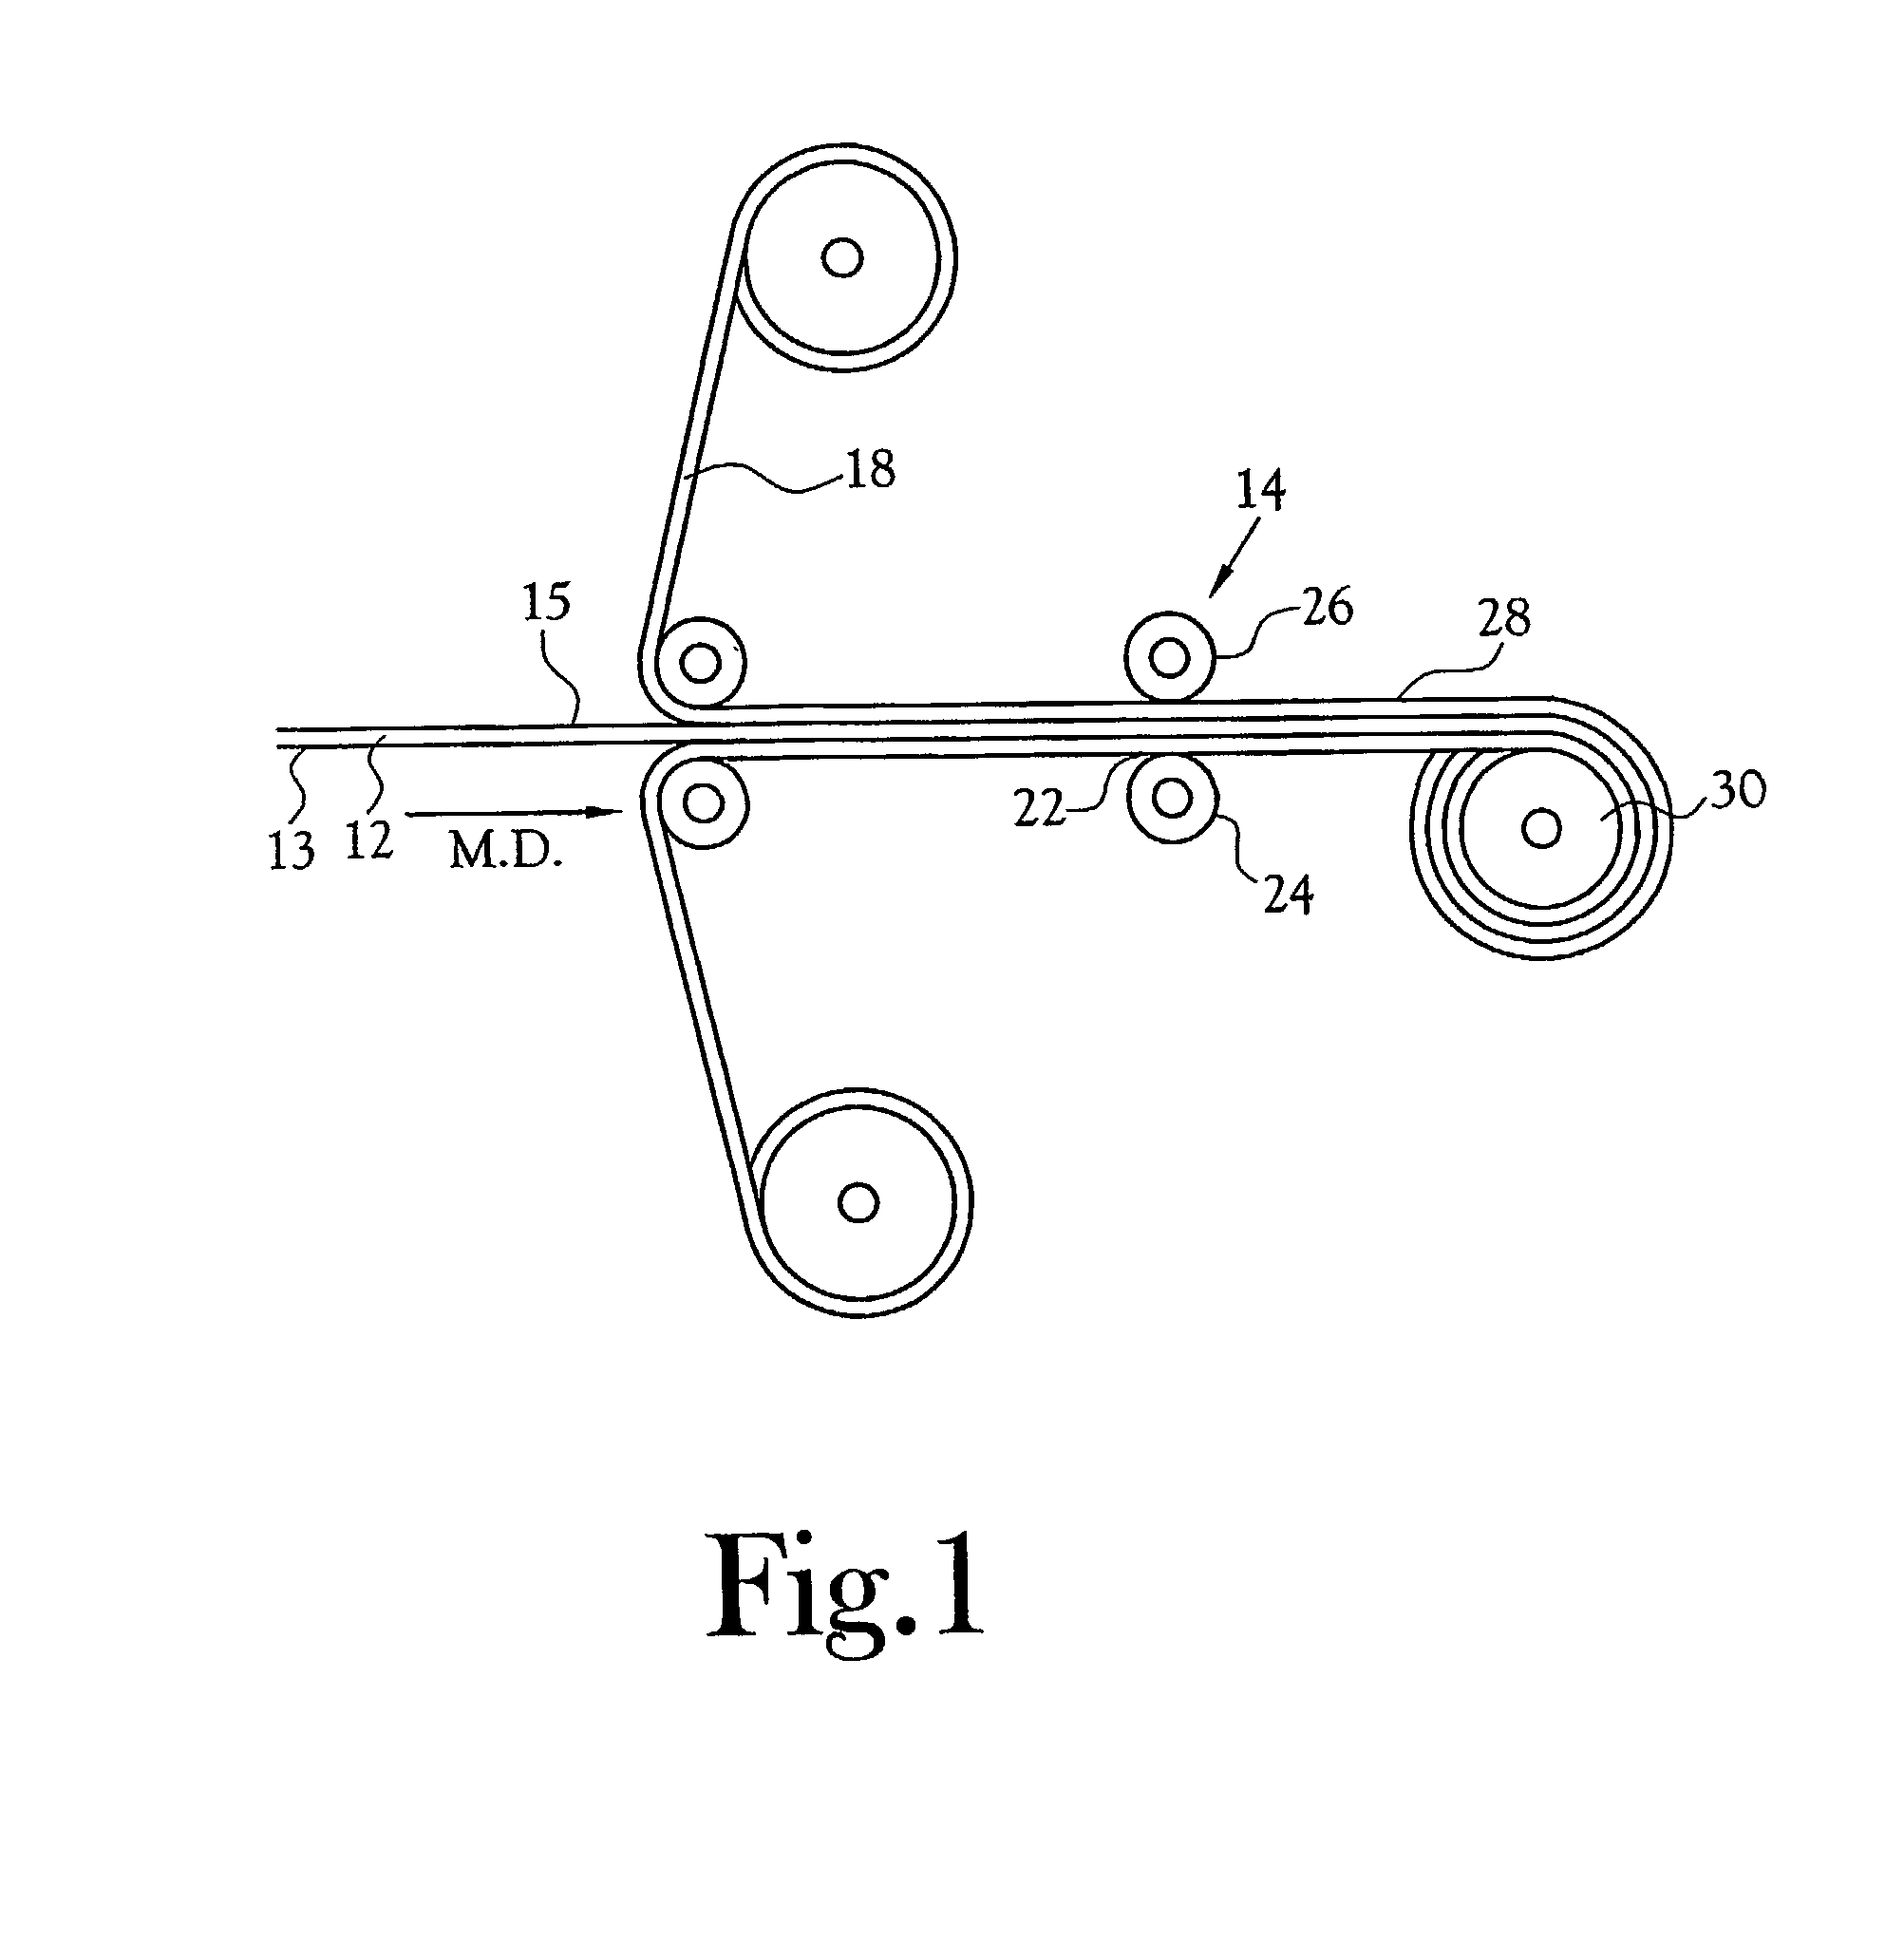 Method for the manufacture of a sheet of reinforcing fibers and the product obtained thereby